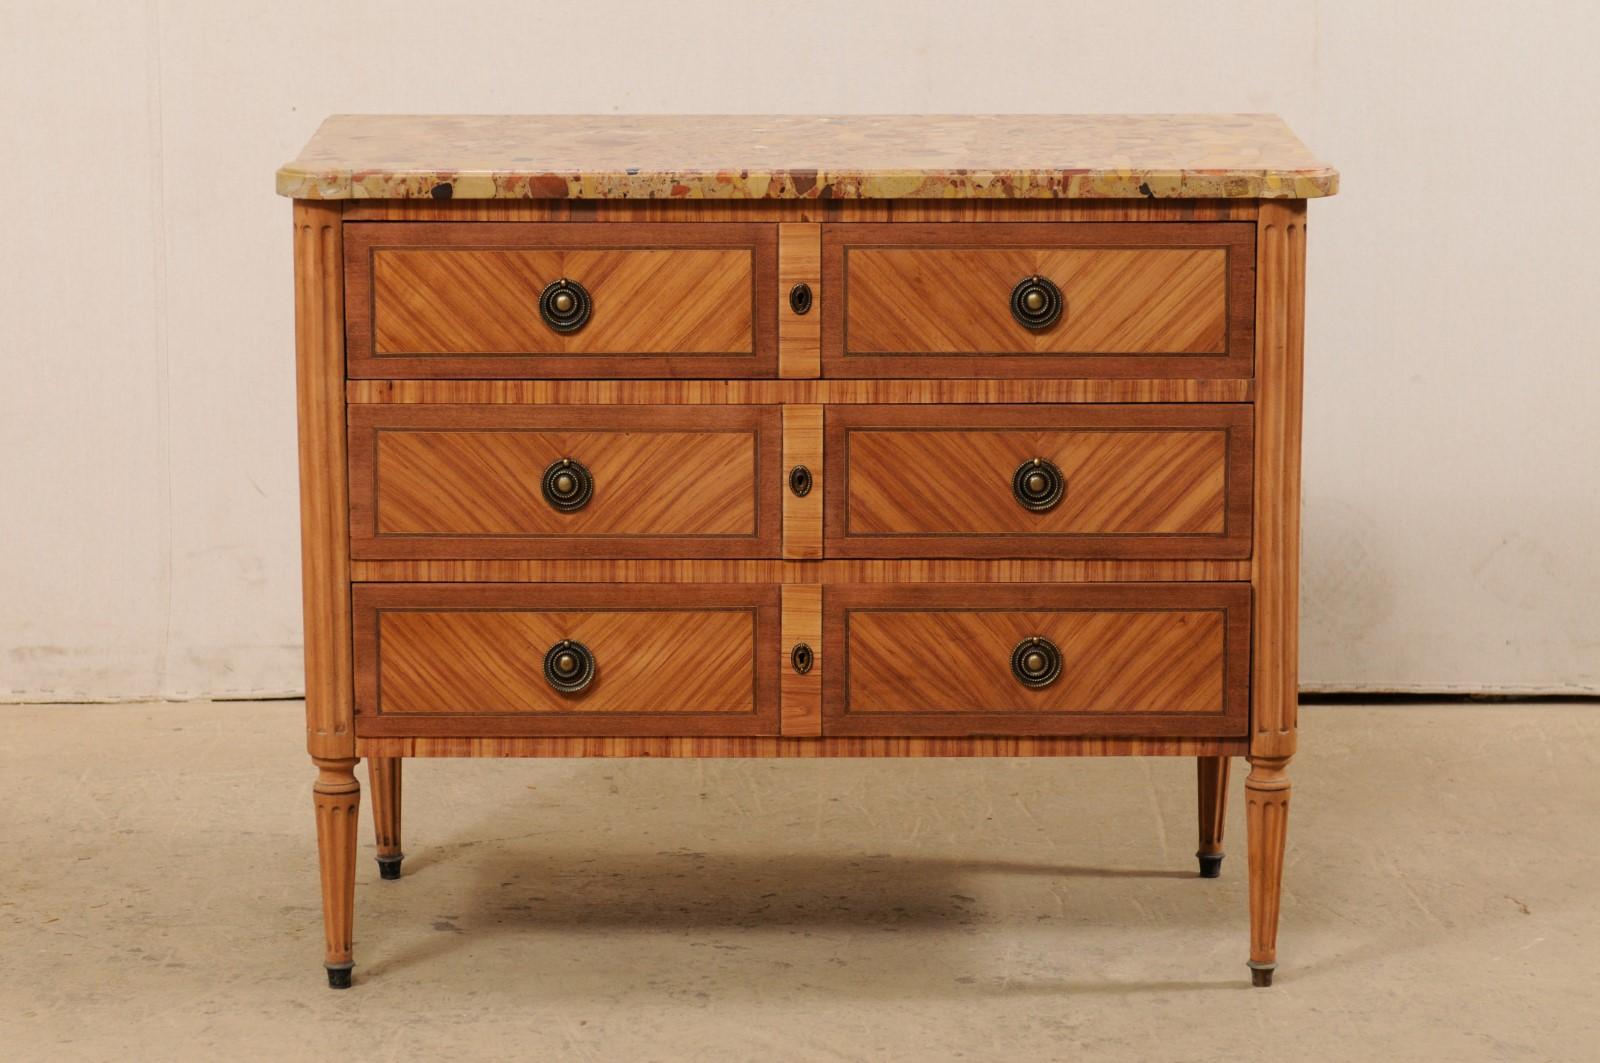 Neoclassical French Commode with Stone Top and Lovely Inlay Pattern Creating Visual Interest